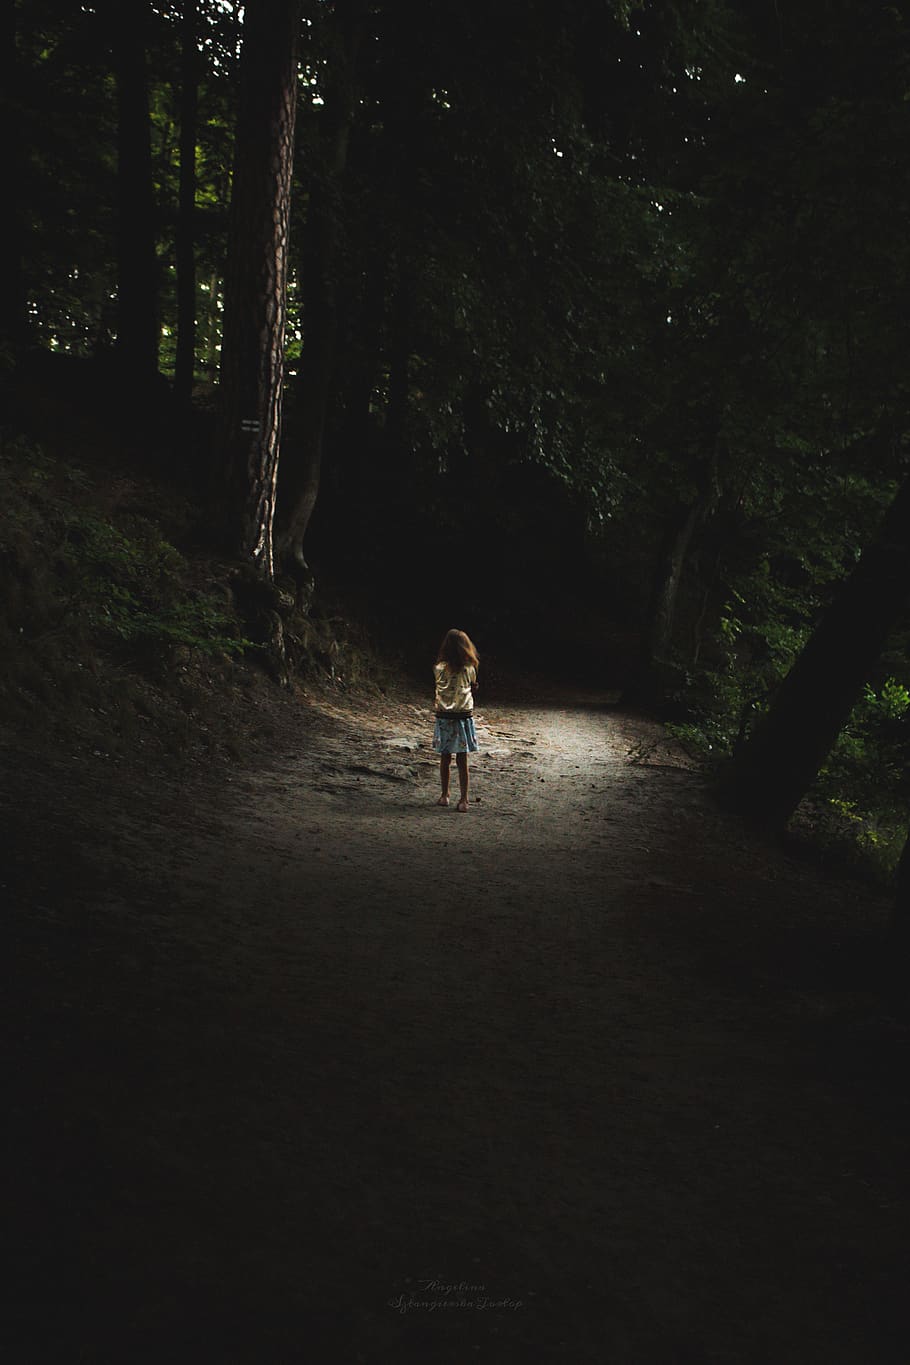 forest, child, alone, dark, gloomy, scary, path, loneliness, lost, kid